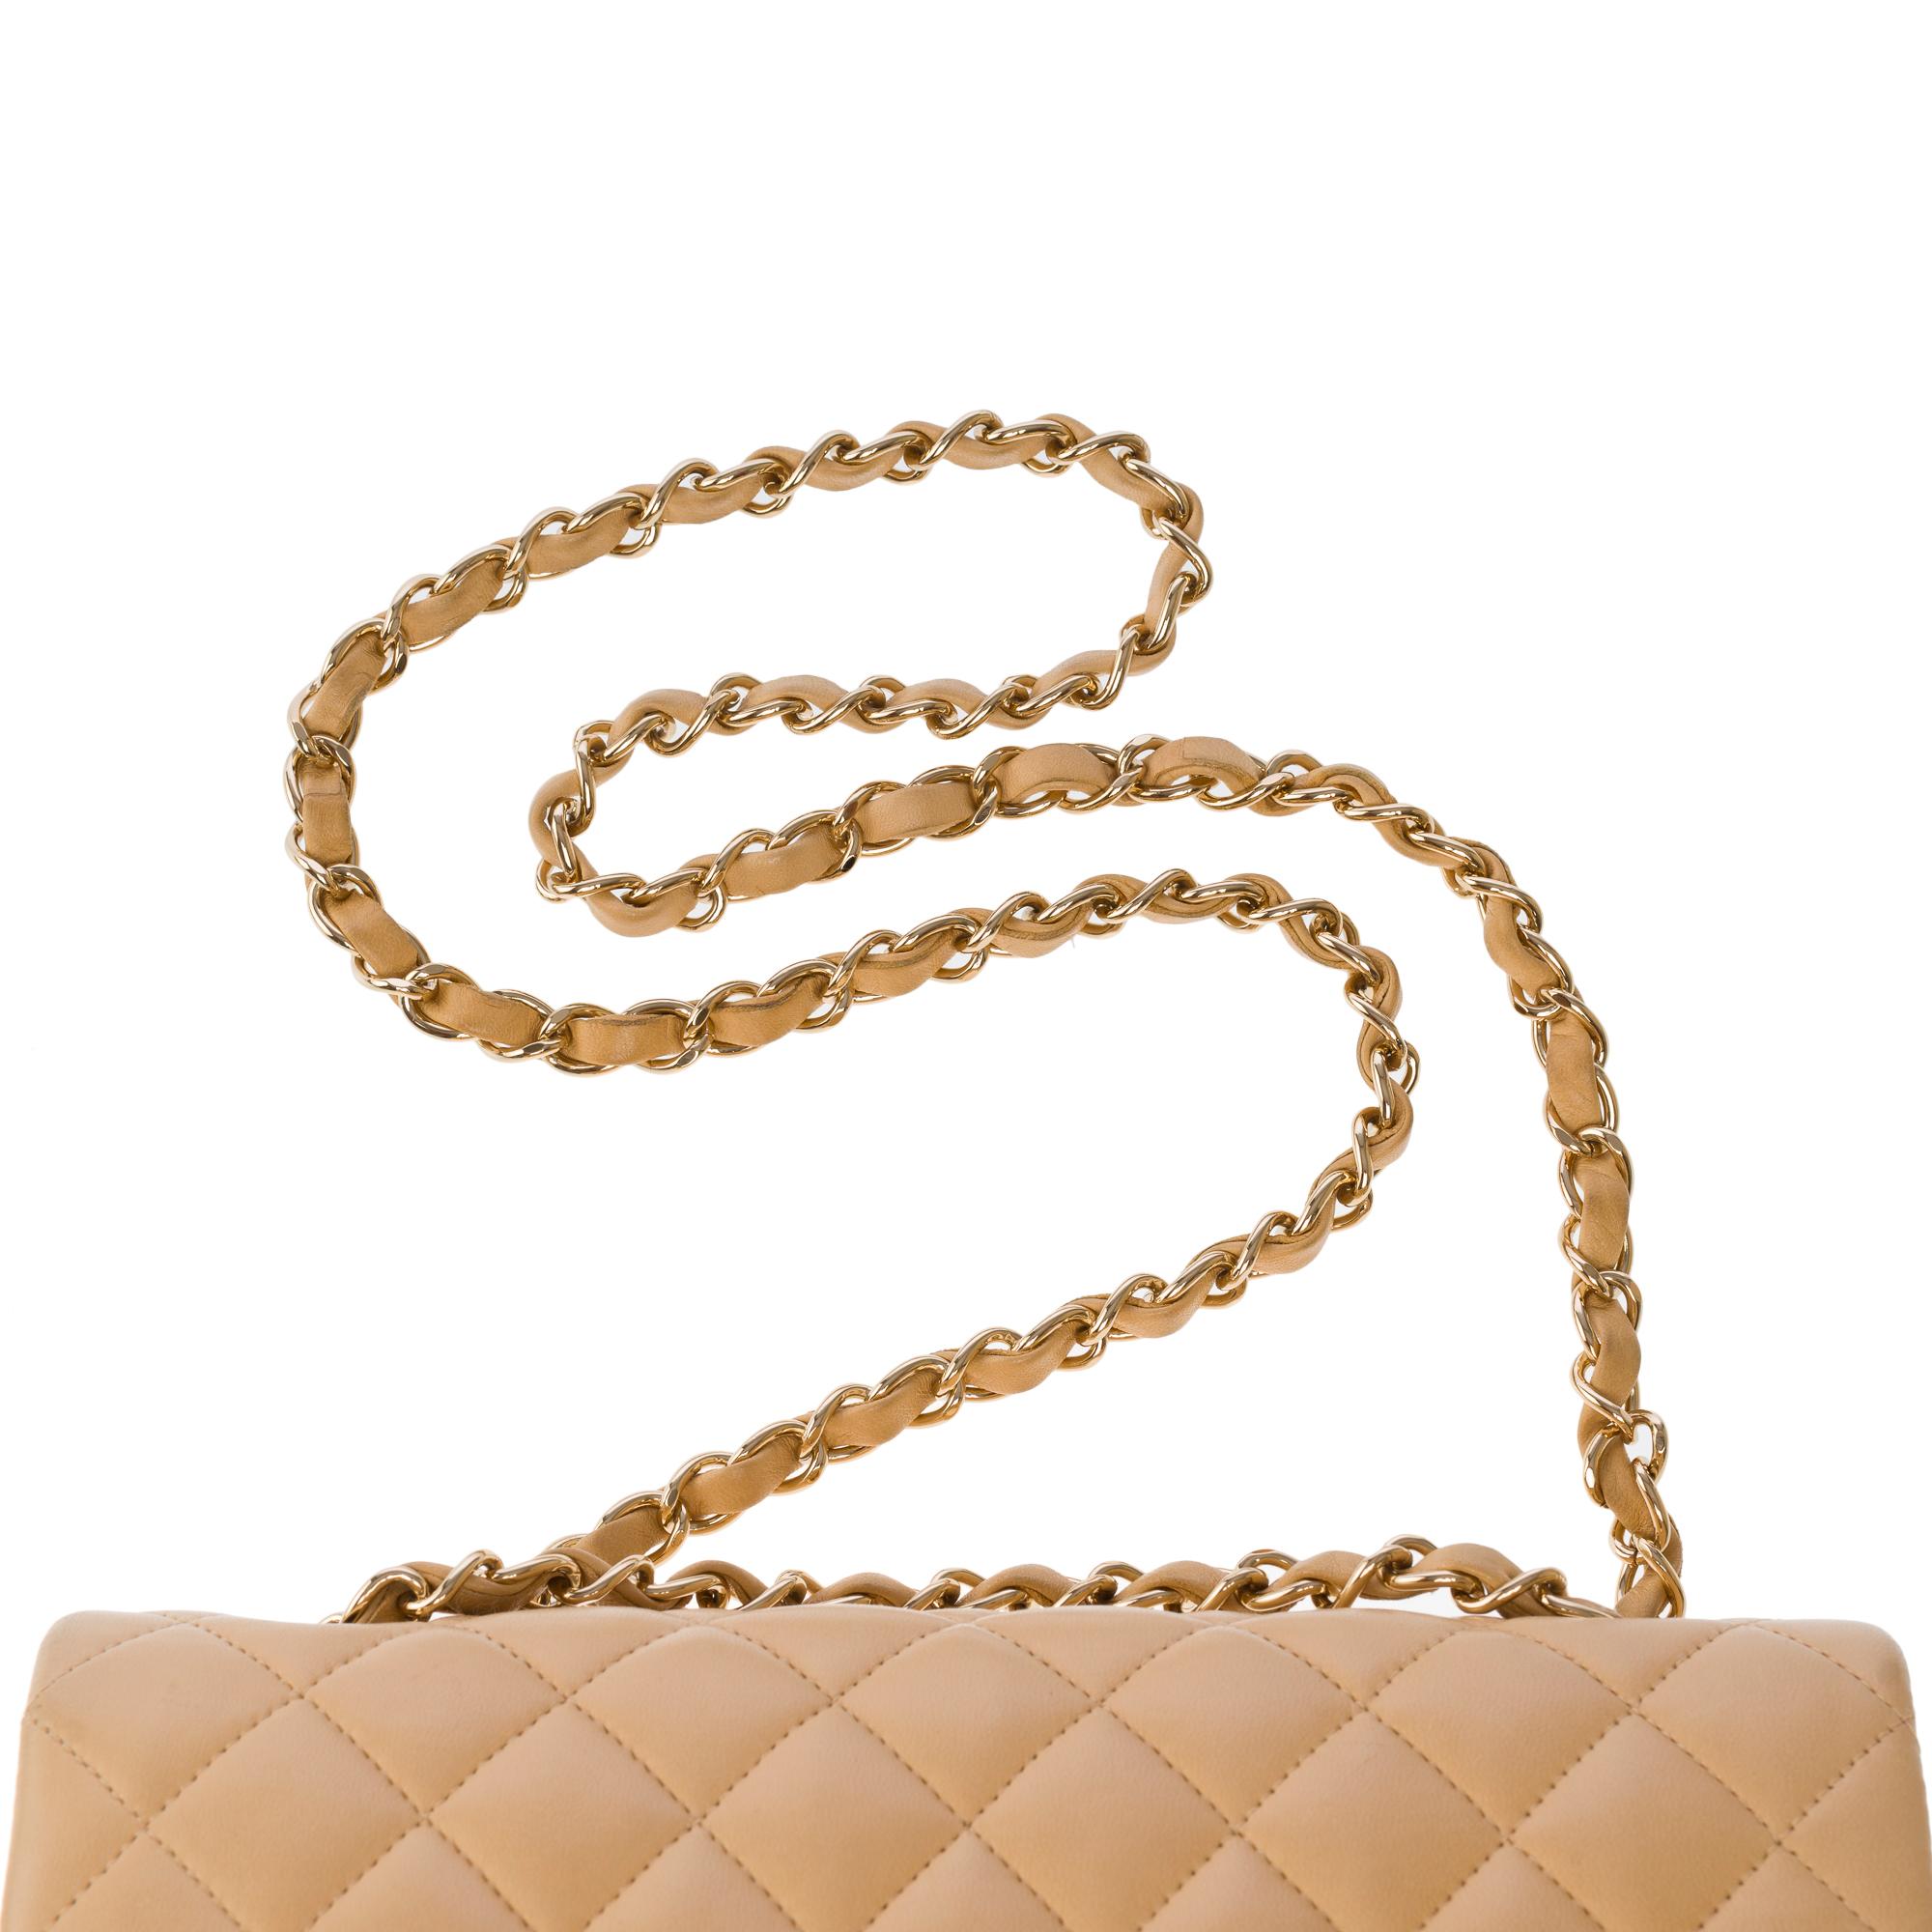 Chanel Timeless 23cm double flap shoulder bag in beige quilted lambskin, GHW For Sale 6